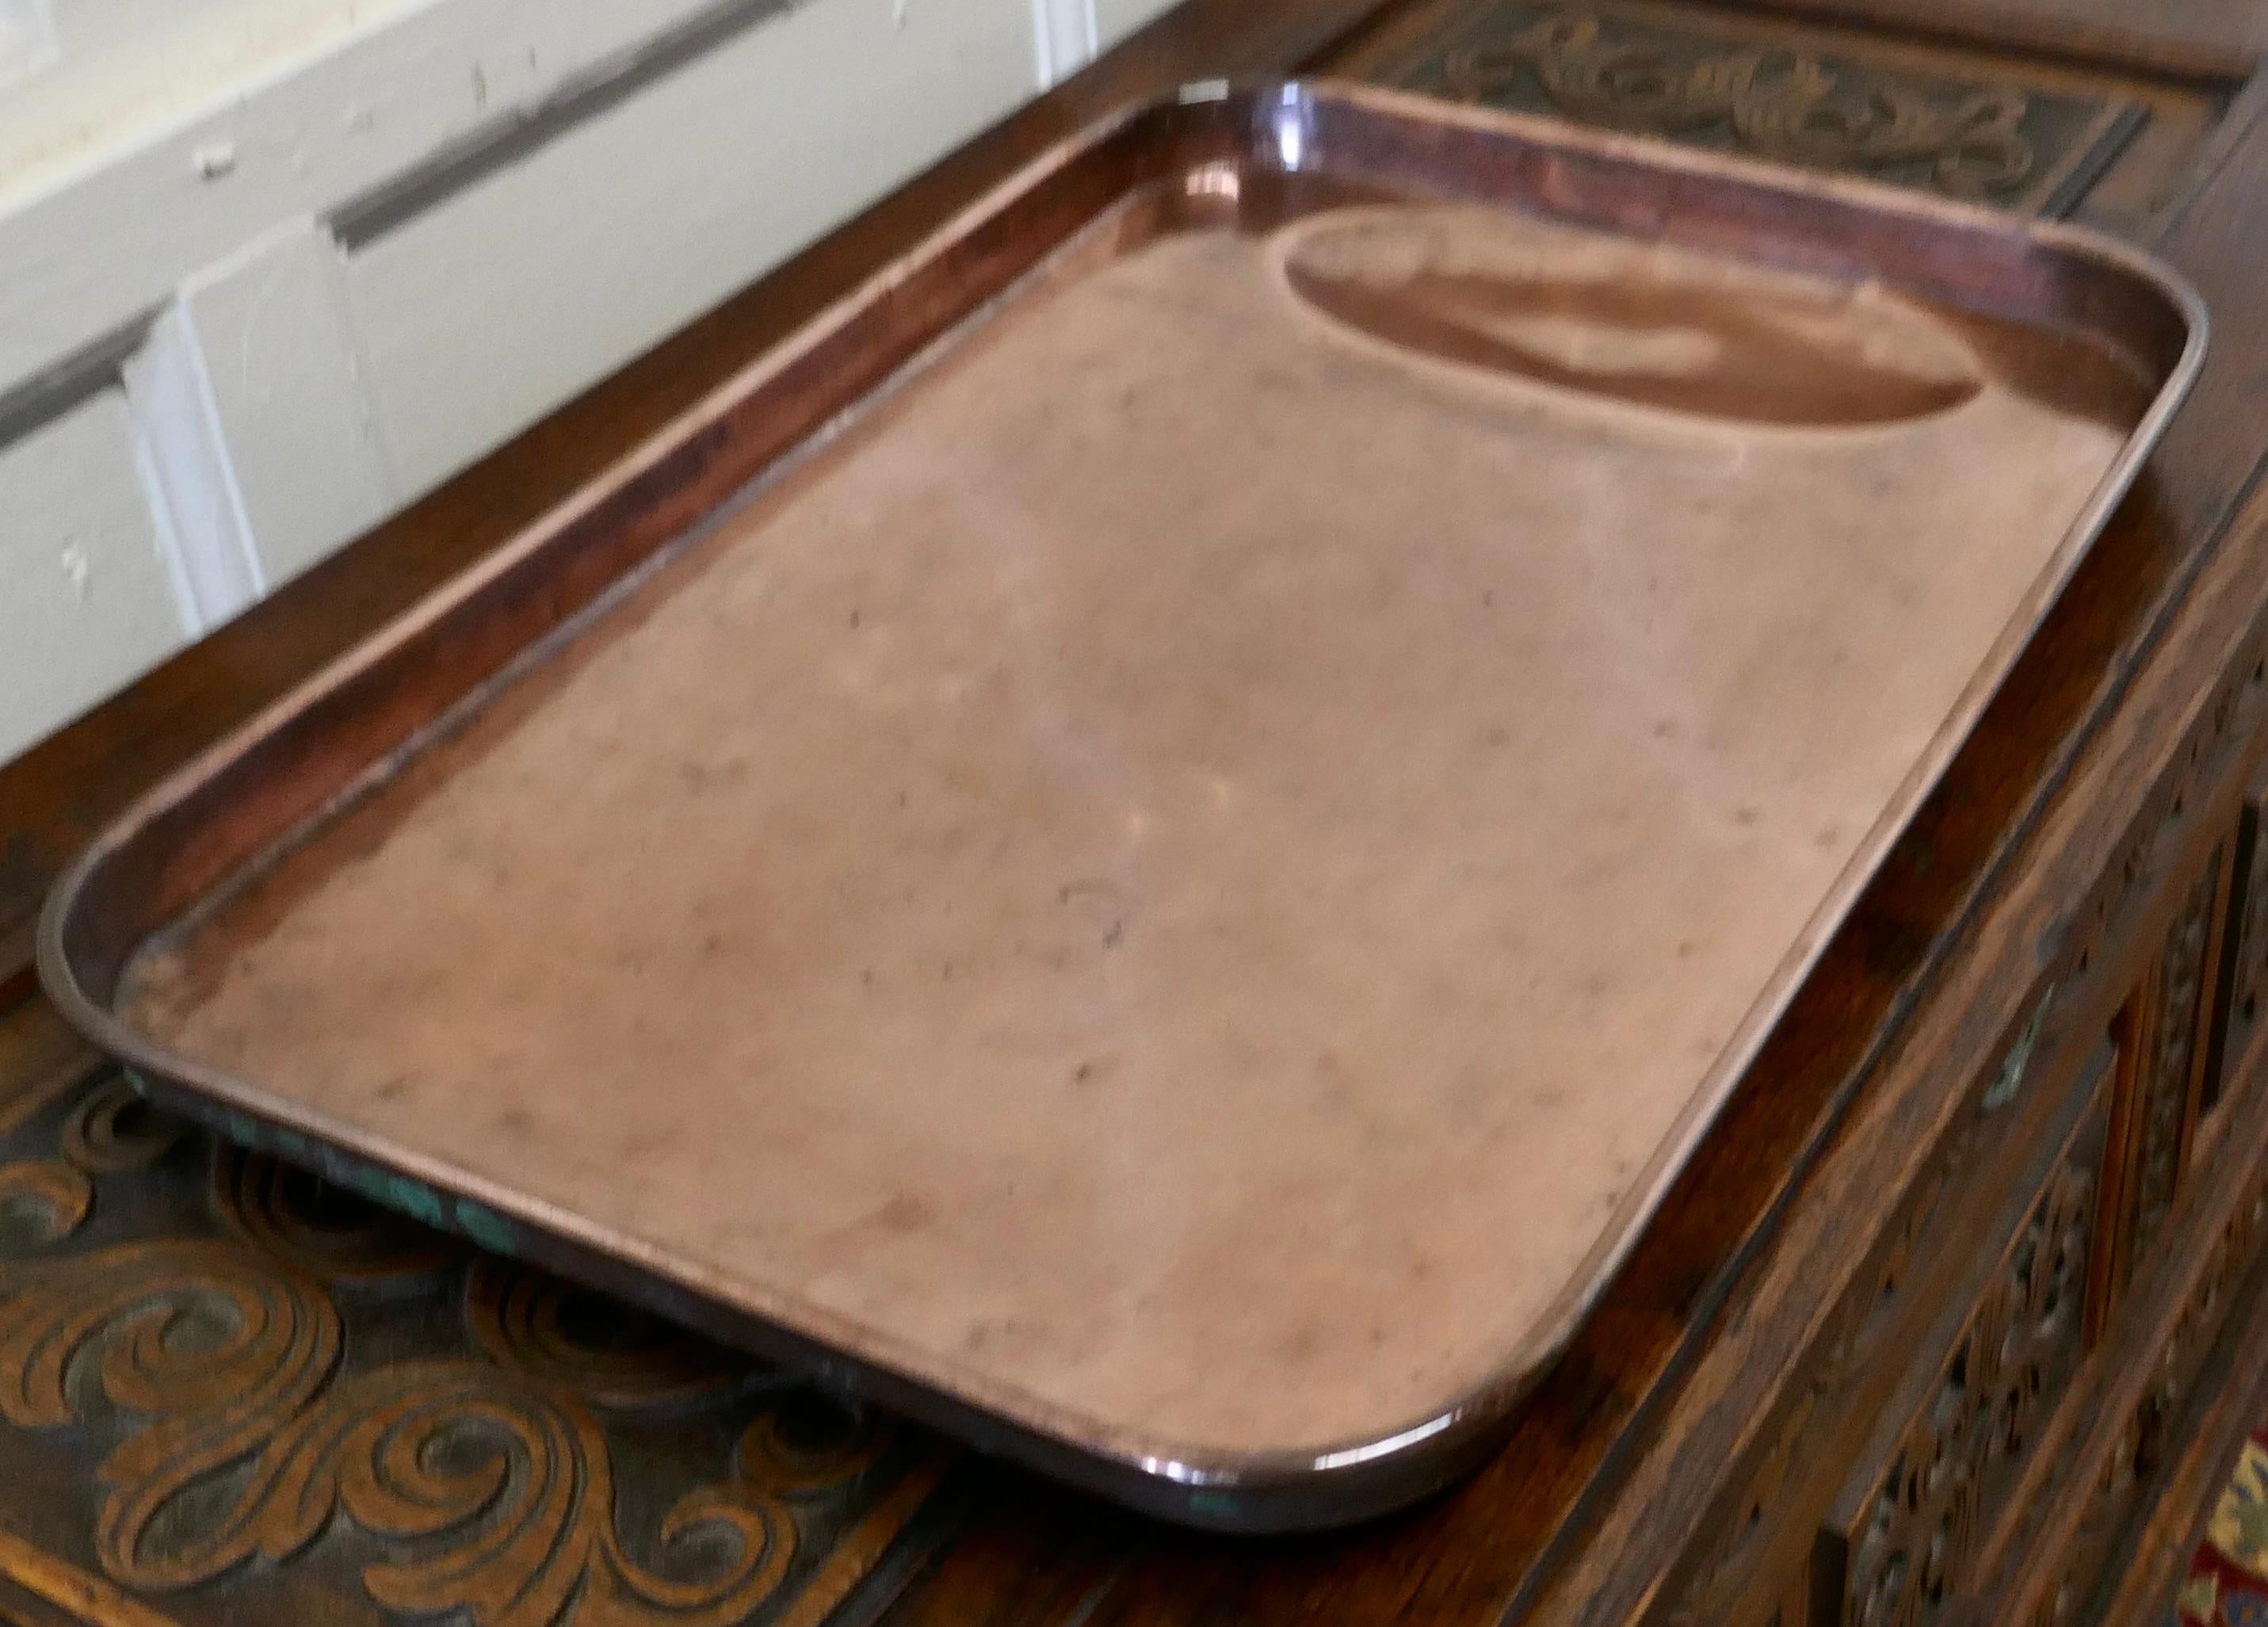 Large 18th Century Copper Roasting Tray with Gravy Well

This is a lovely looking piece of Copper cookware, the tray is very rare and would have been much treasured piece
The tray has 1.5” high sides with a rolled top edge and an oval gravy
well at